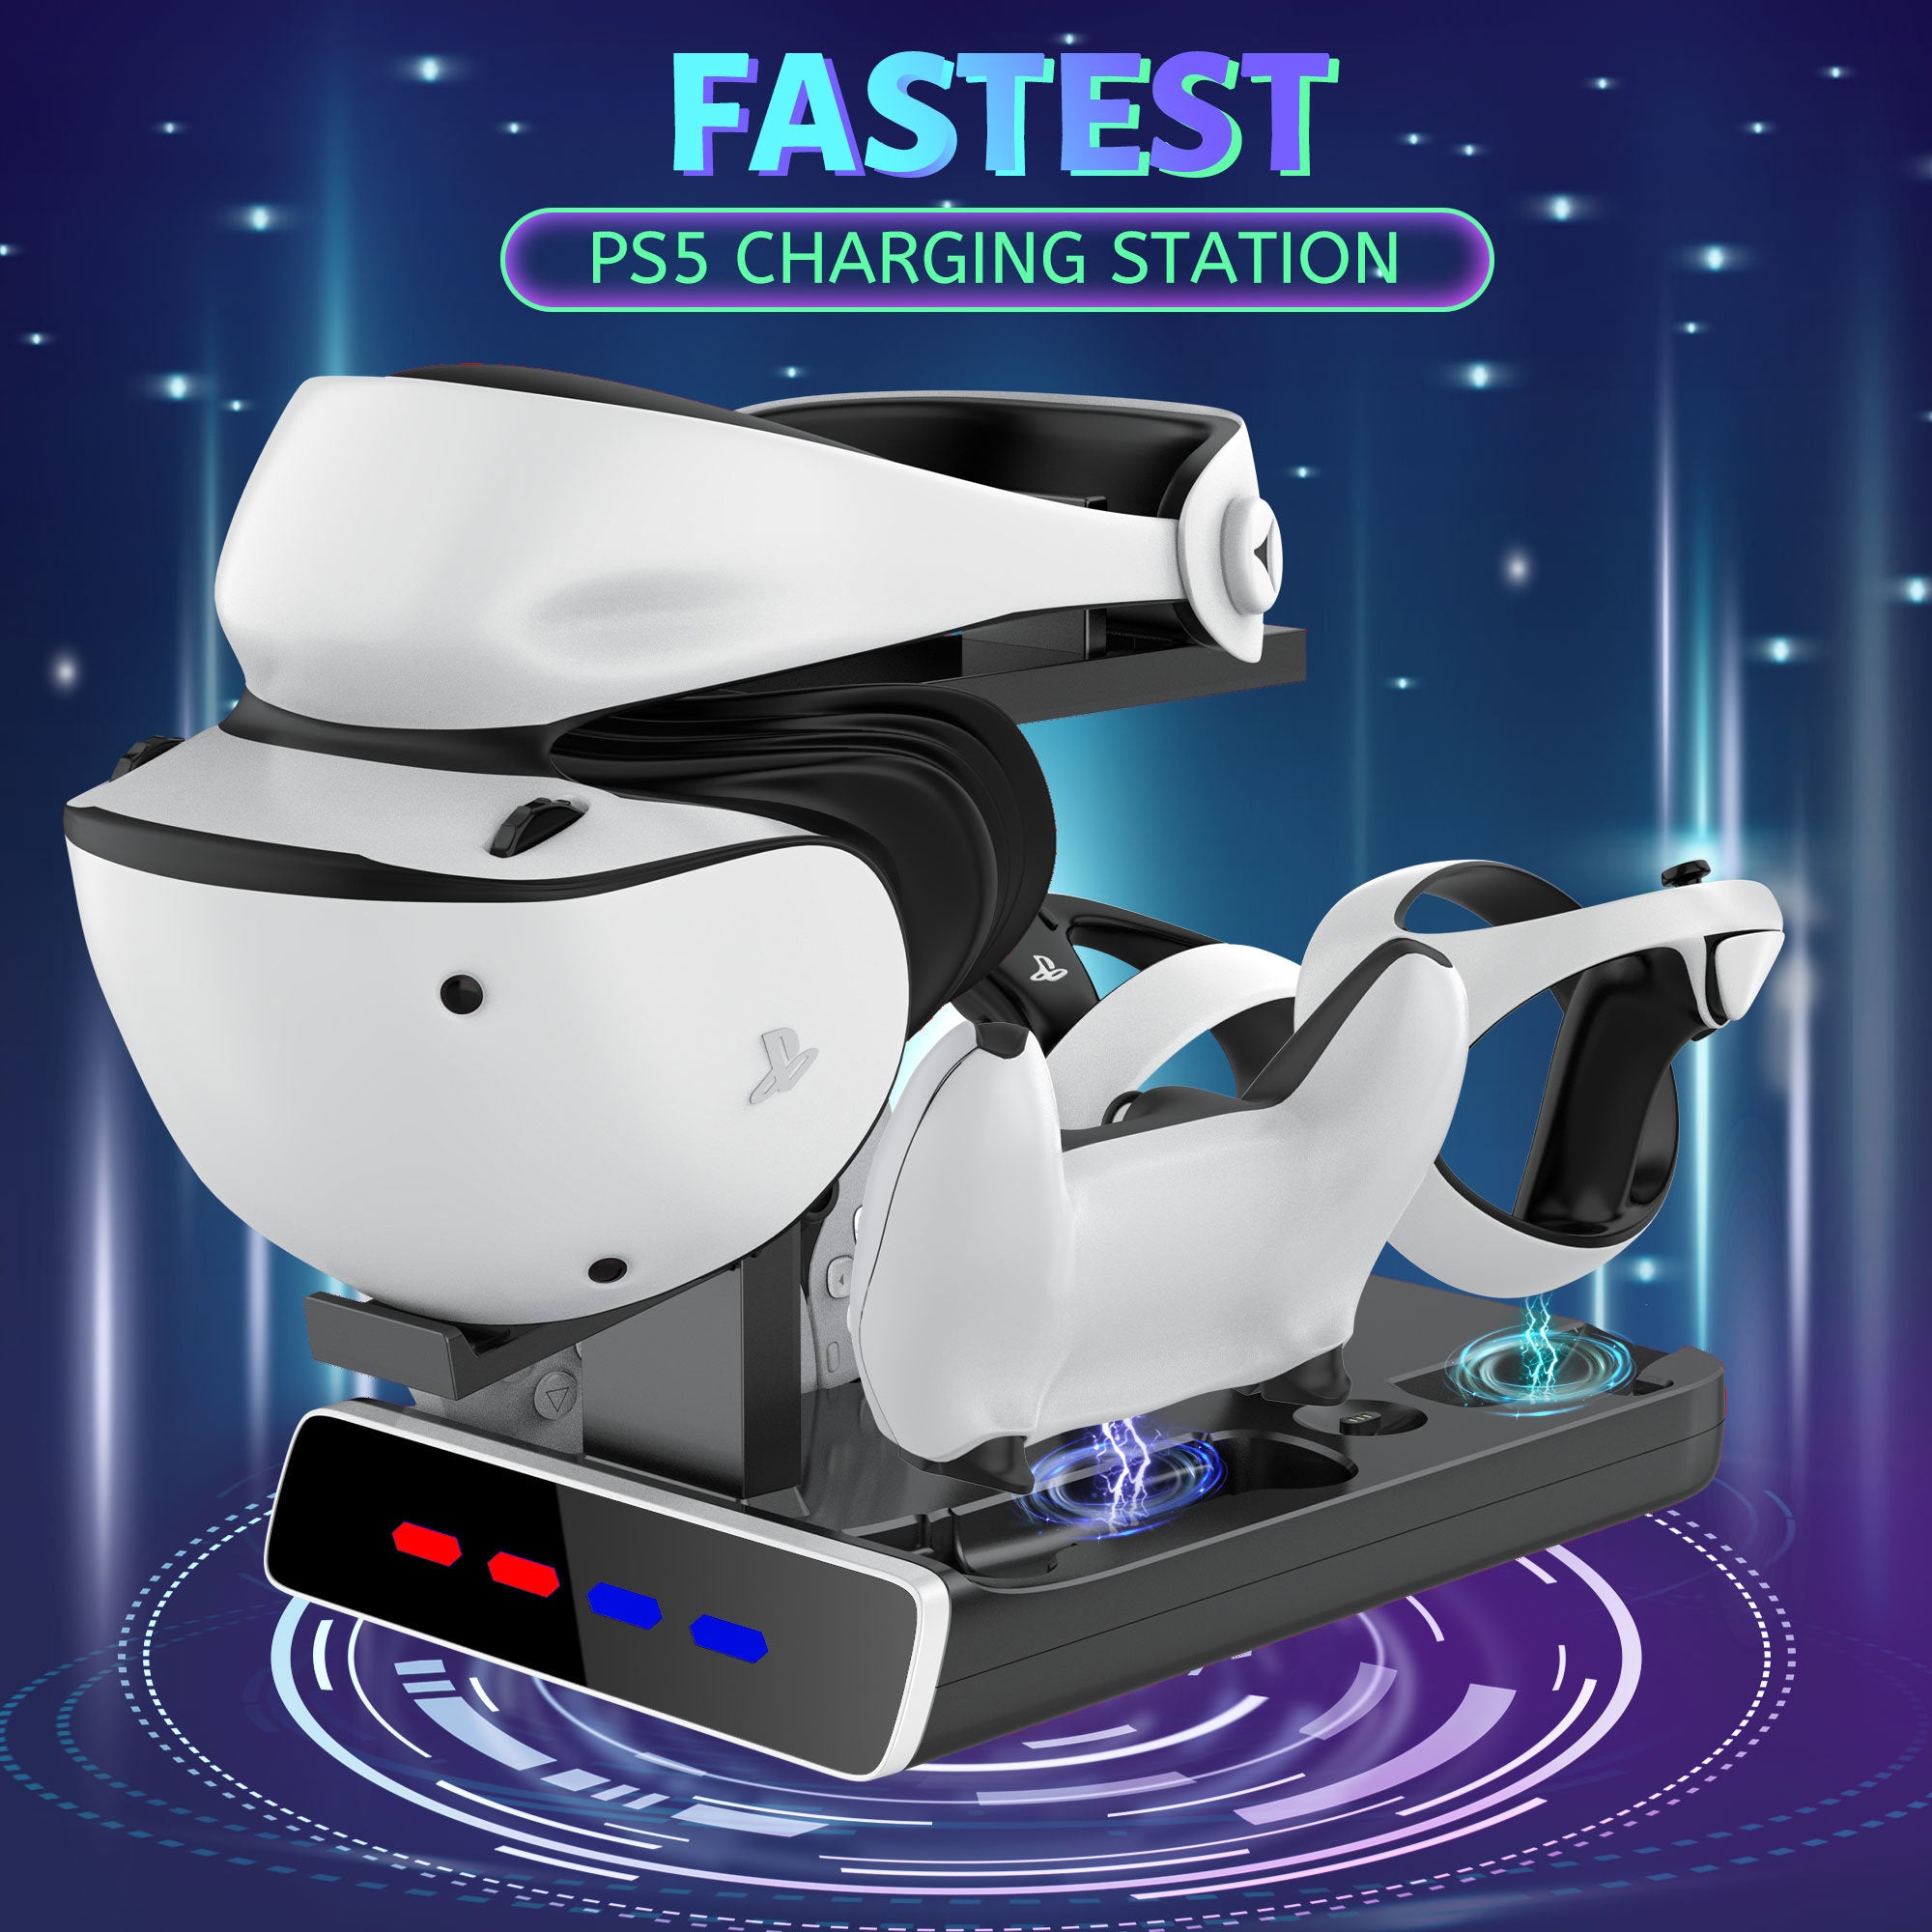 A PSVR2 Controller Charging Dock with LED Light, VR Stand Display is sitting on top of a white Fast Charging Dock.